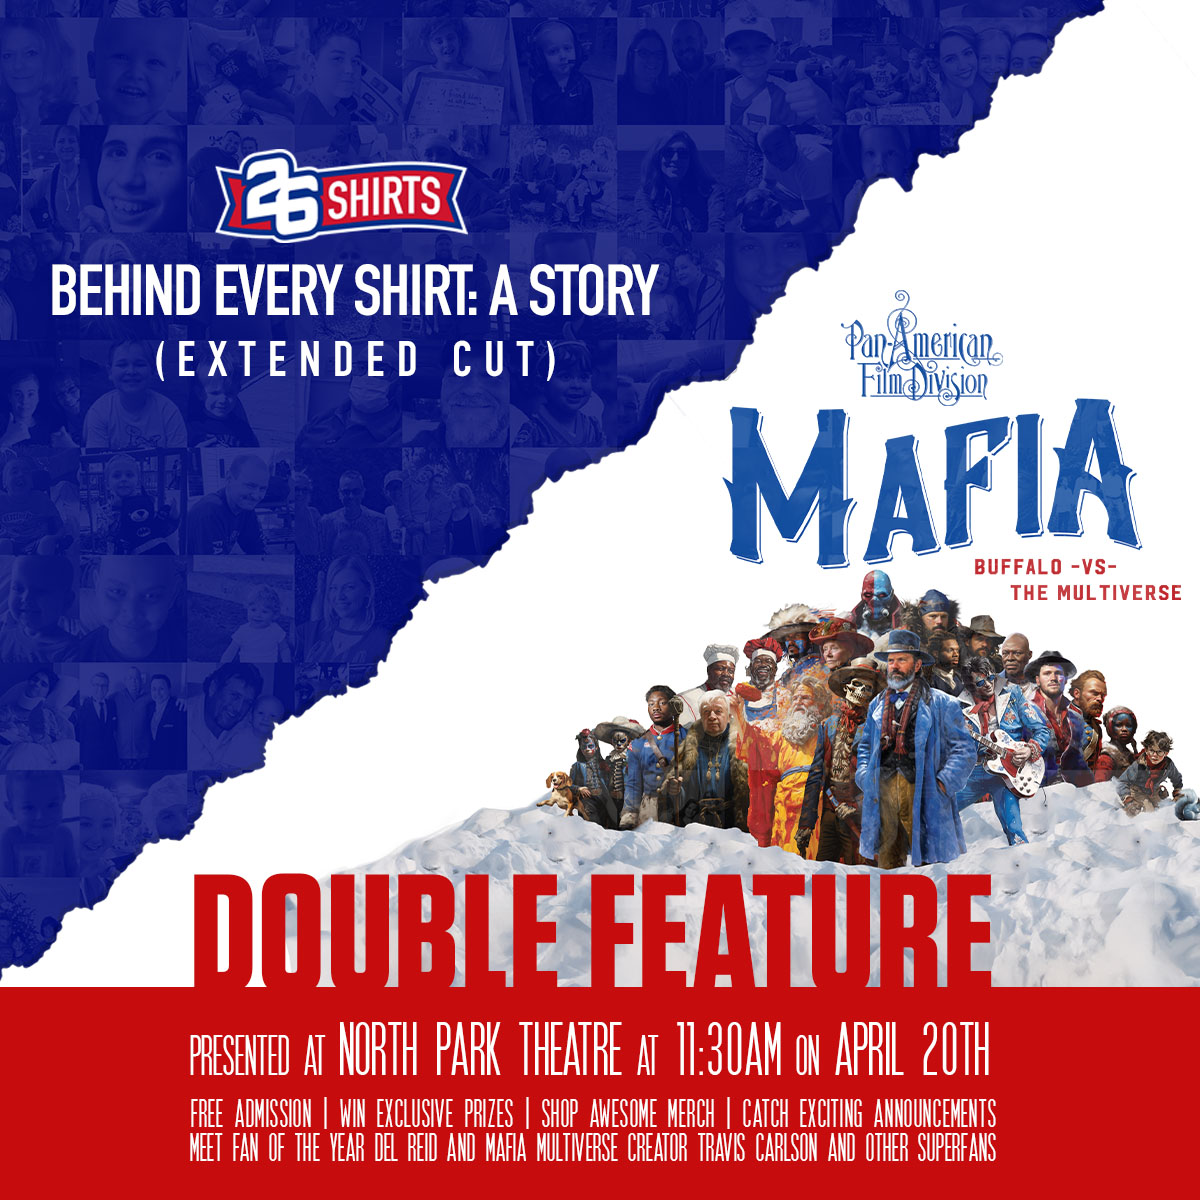 TOMORROW at @NorthParkTheatr: Our *FREE* Double Feature with Pan American Films is at 11:30am. We're proud to be showing the extended cut of @buffaloabove's award-winning short film 'Behind Every Shirt: A Story' There will be cool giveaways and stuff as well. Hope to see you!